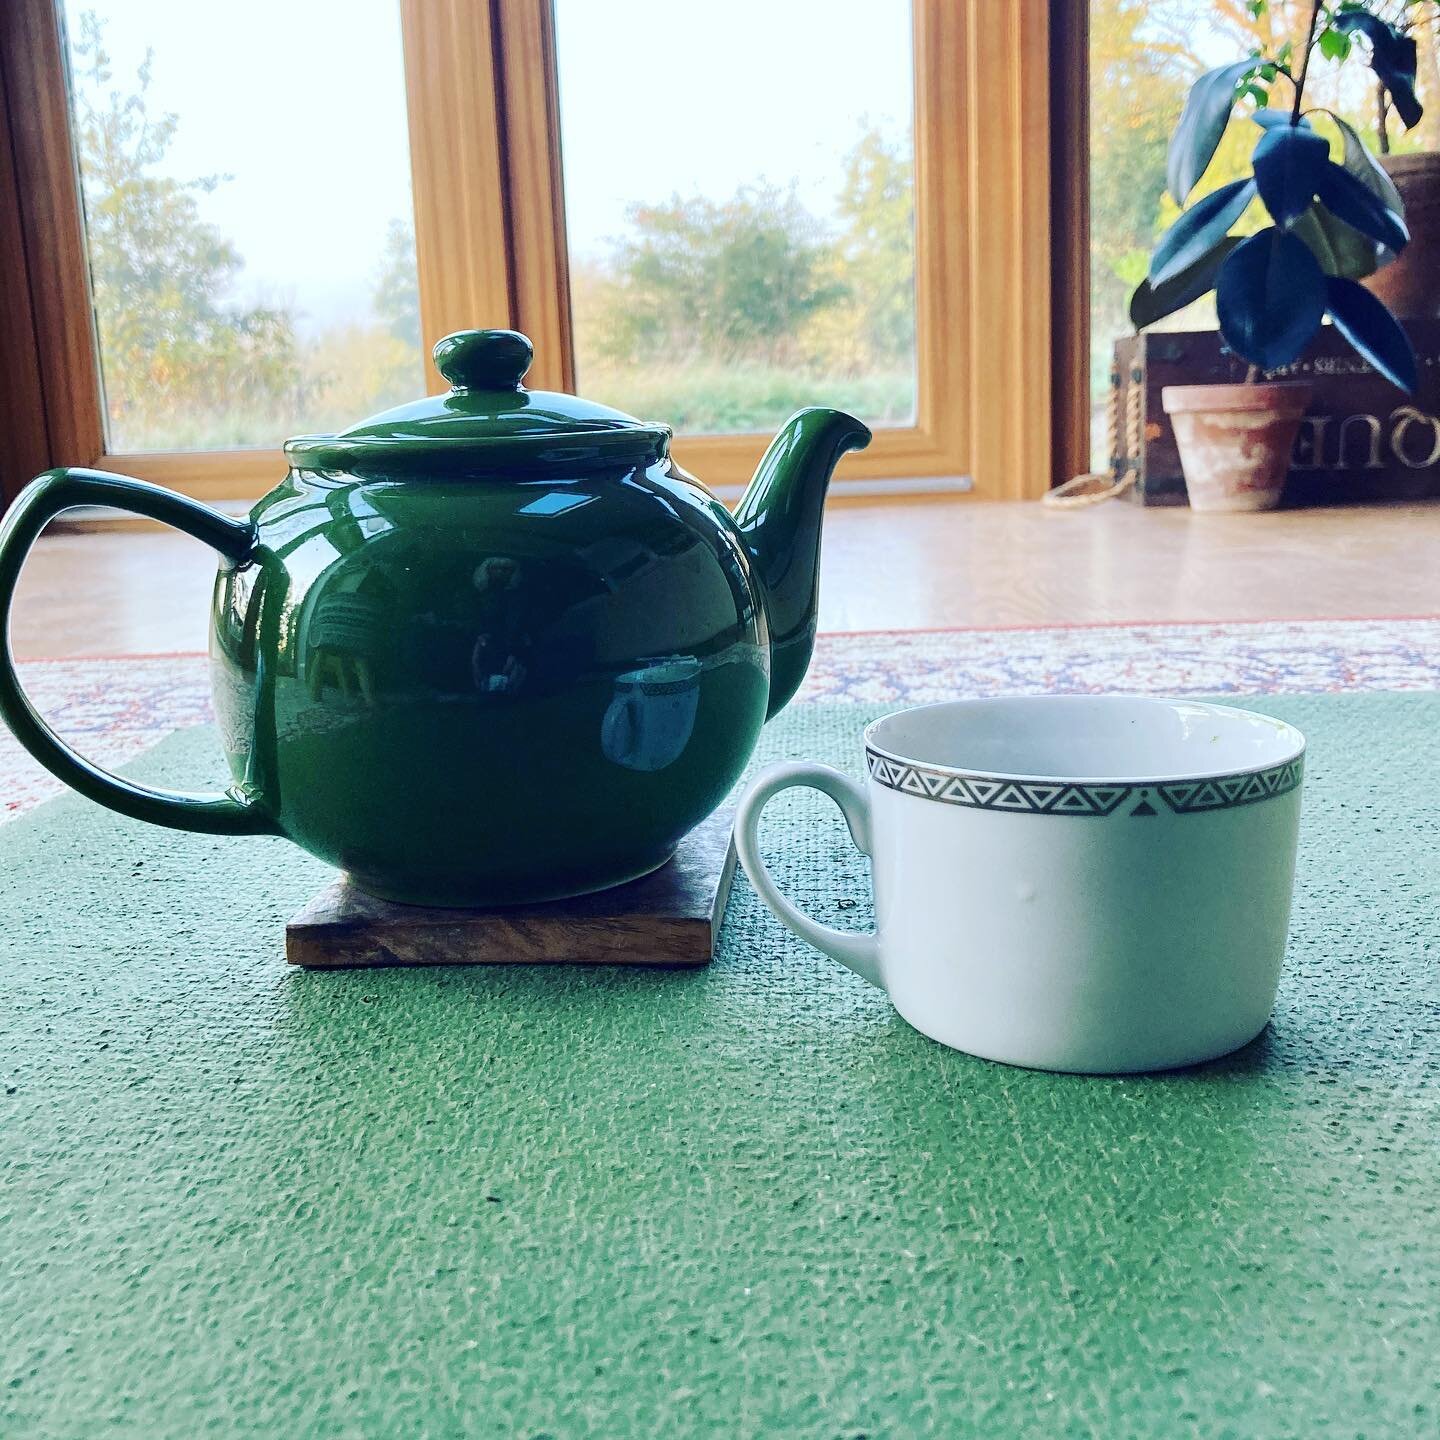 My kind of productivity ☕️ The great act of enjoying a cup of tea fully 🙏🏻 Don&rsquo;t run around all day being busy or needing to look busy, it&rsquo;s a waste of precious time 😊 Do not listen to those who tell you that you should be busy 👍 Spen